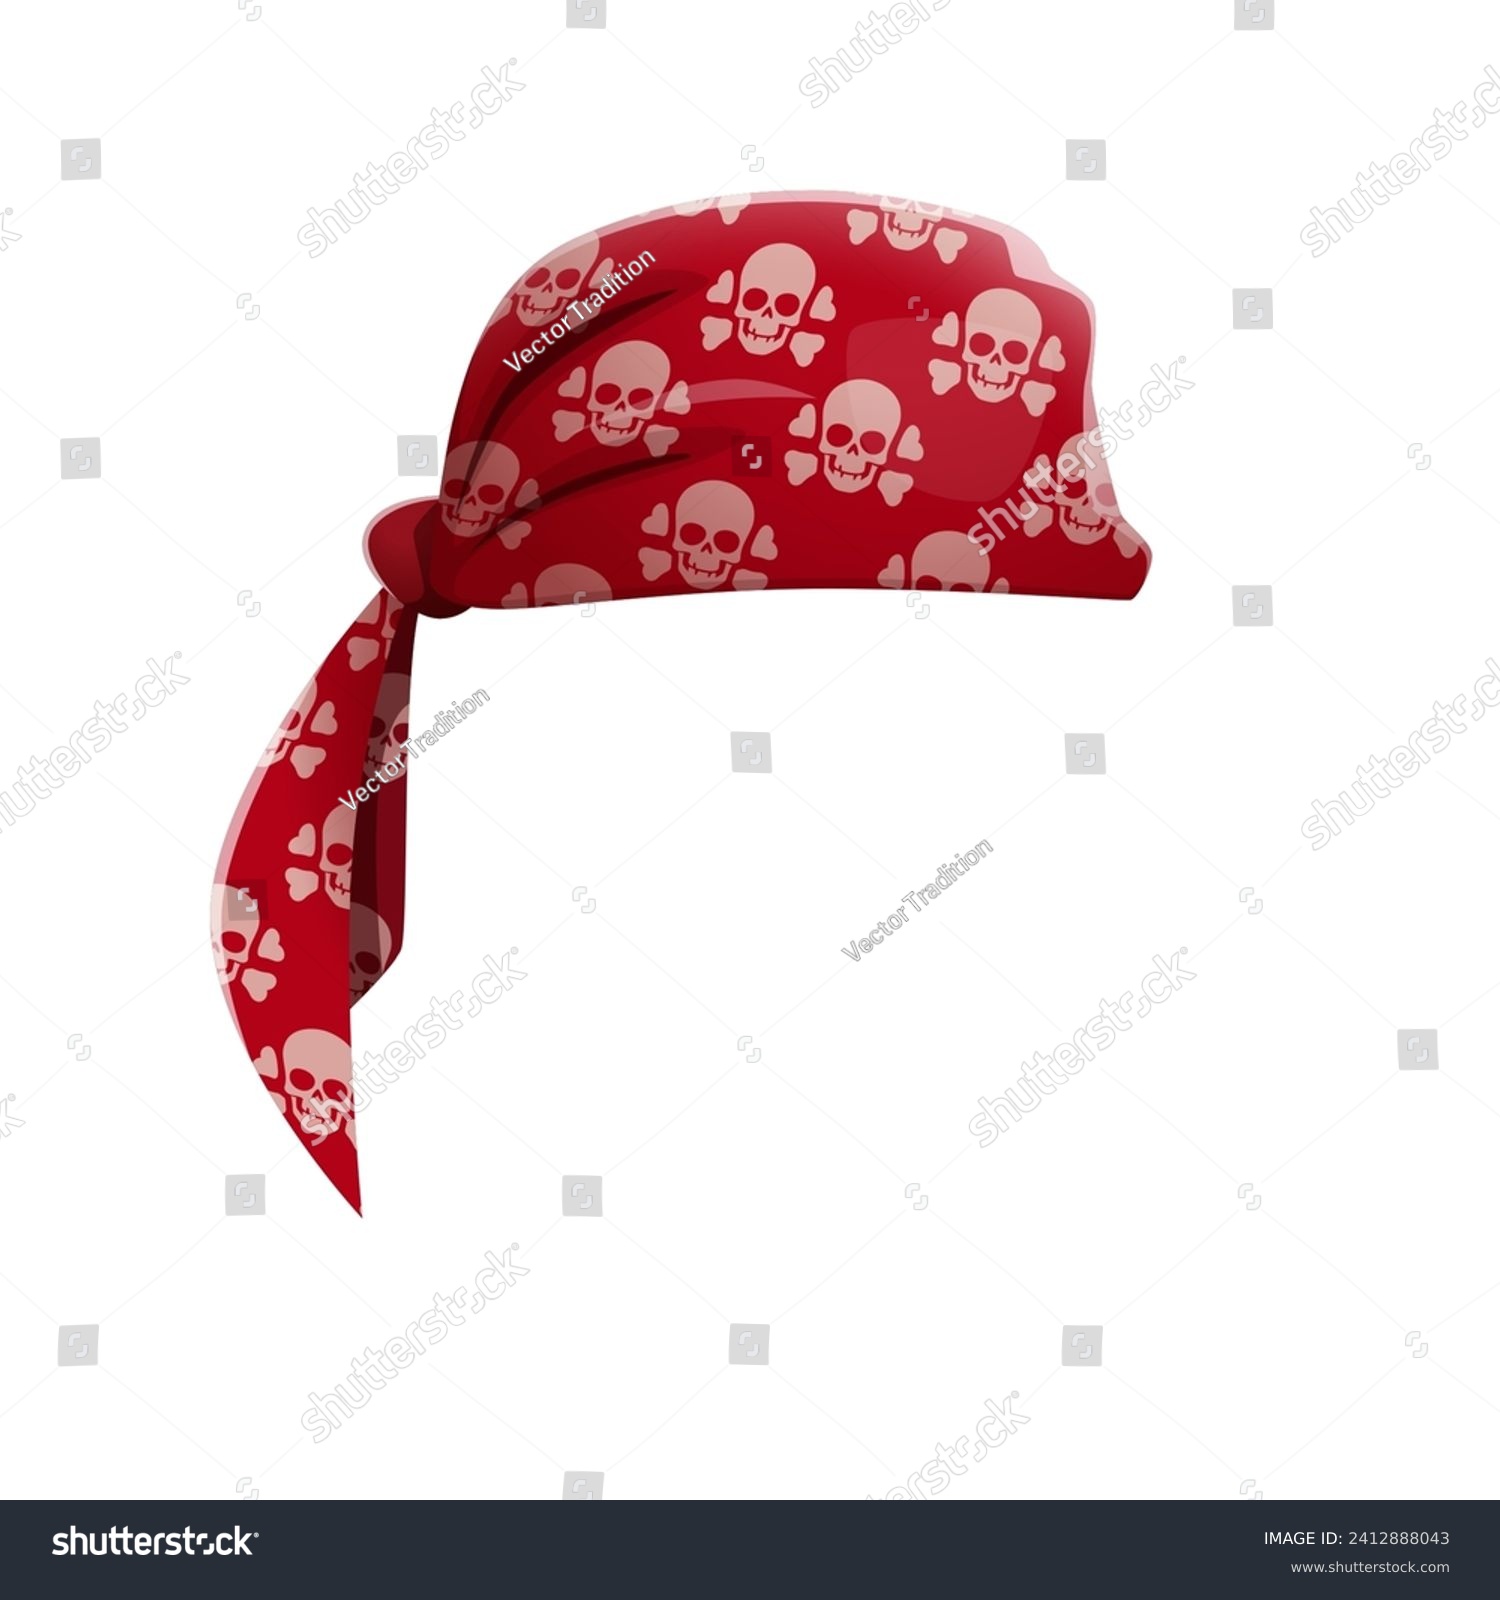 SVG of Pirate bandana, cartoon red corsair textile headwear with skull and crossbones motifs. Isolated vector sailor head scarf, vintage rover handkerchief, filibuster costume signifies buccaneer spirit svg